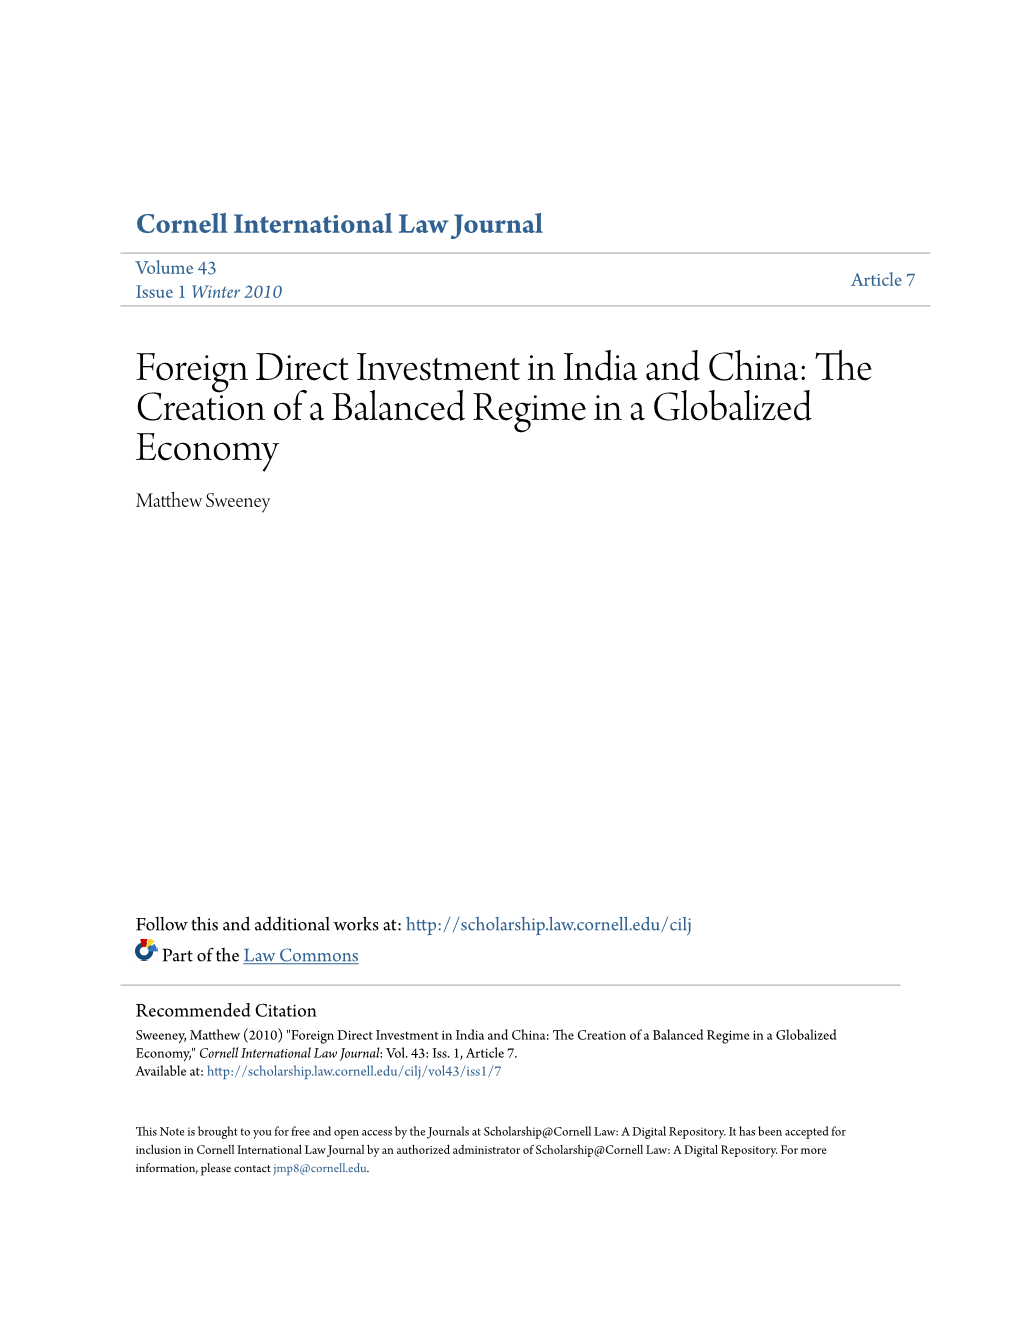 Foreign Direct Investment in India and China: the Creation of a Balanced Regime in a Globalized Economy Matthew Wees Ney